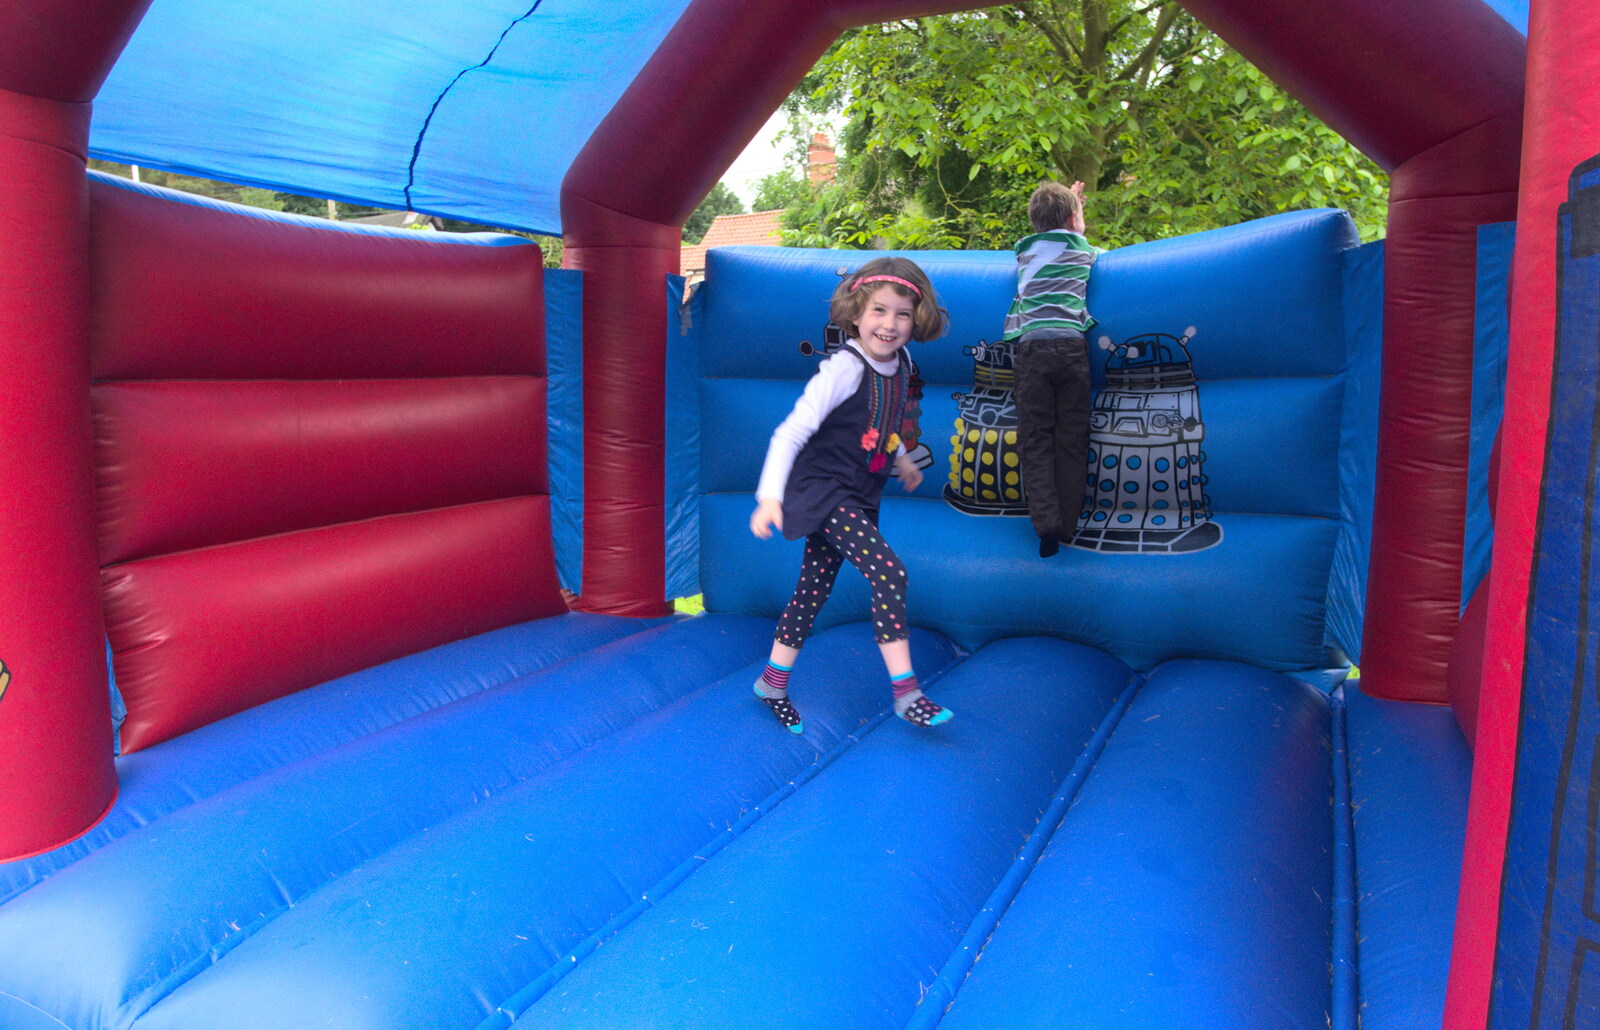 Amelia bounces from The Queen's Village Hall Birthday, Brome, Suffolk - 12th June 2016